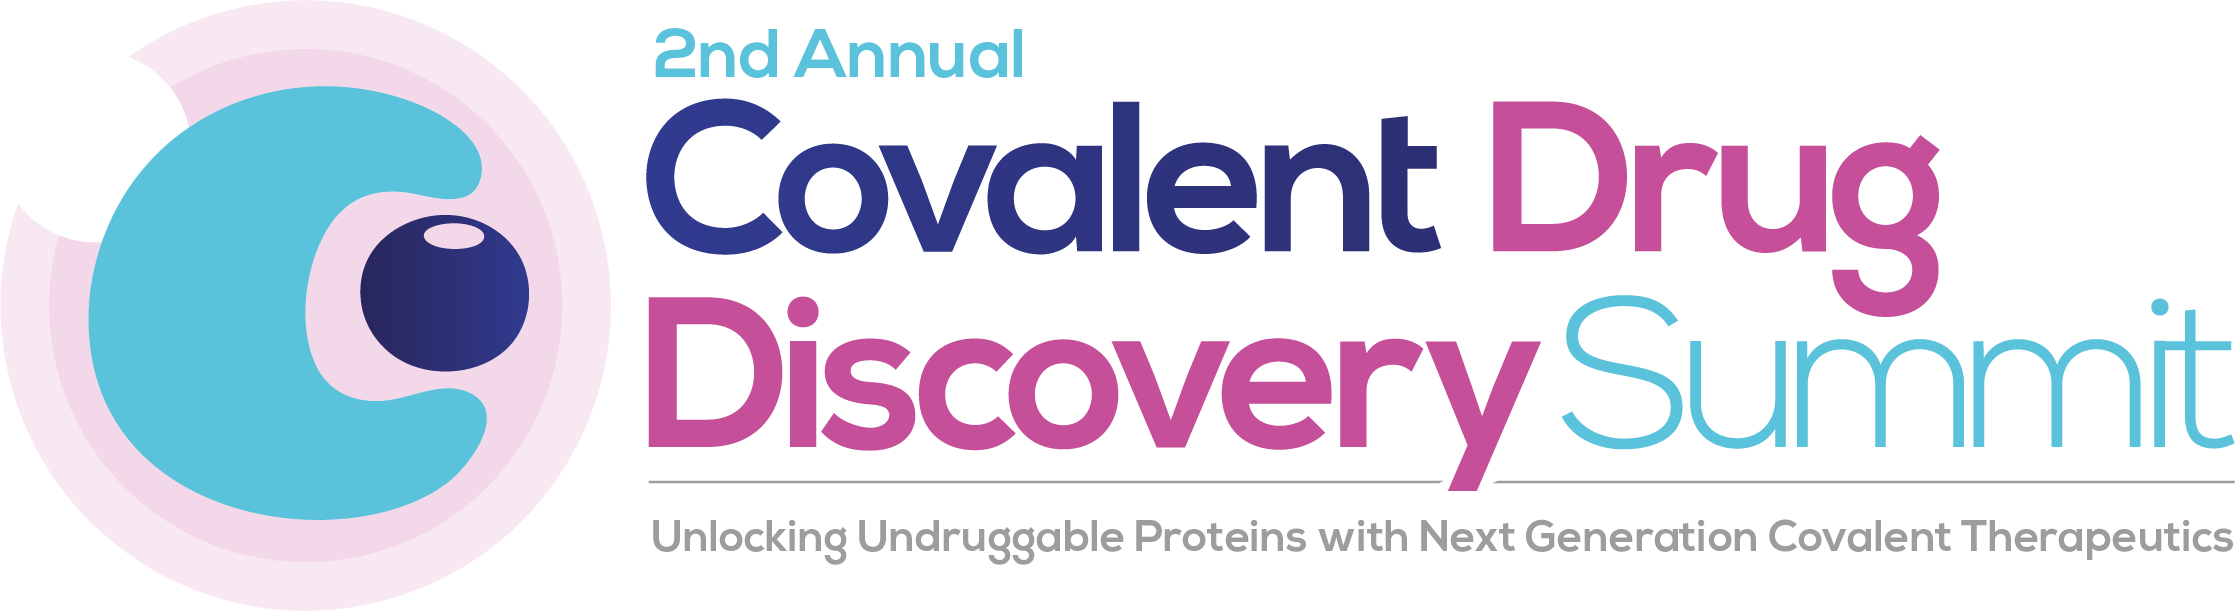 Next in Series - Covalent Drug Discovery Summit logo